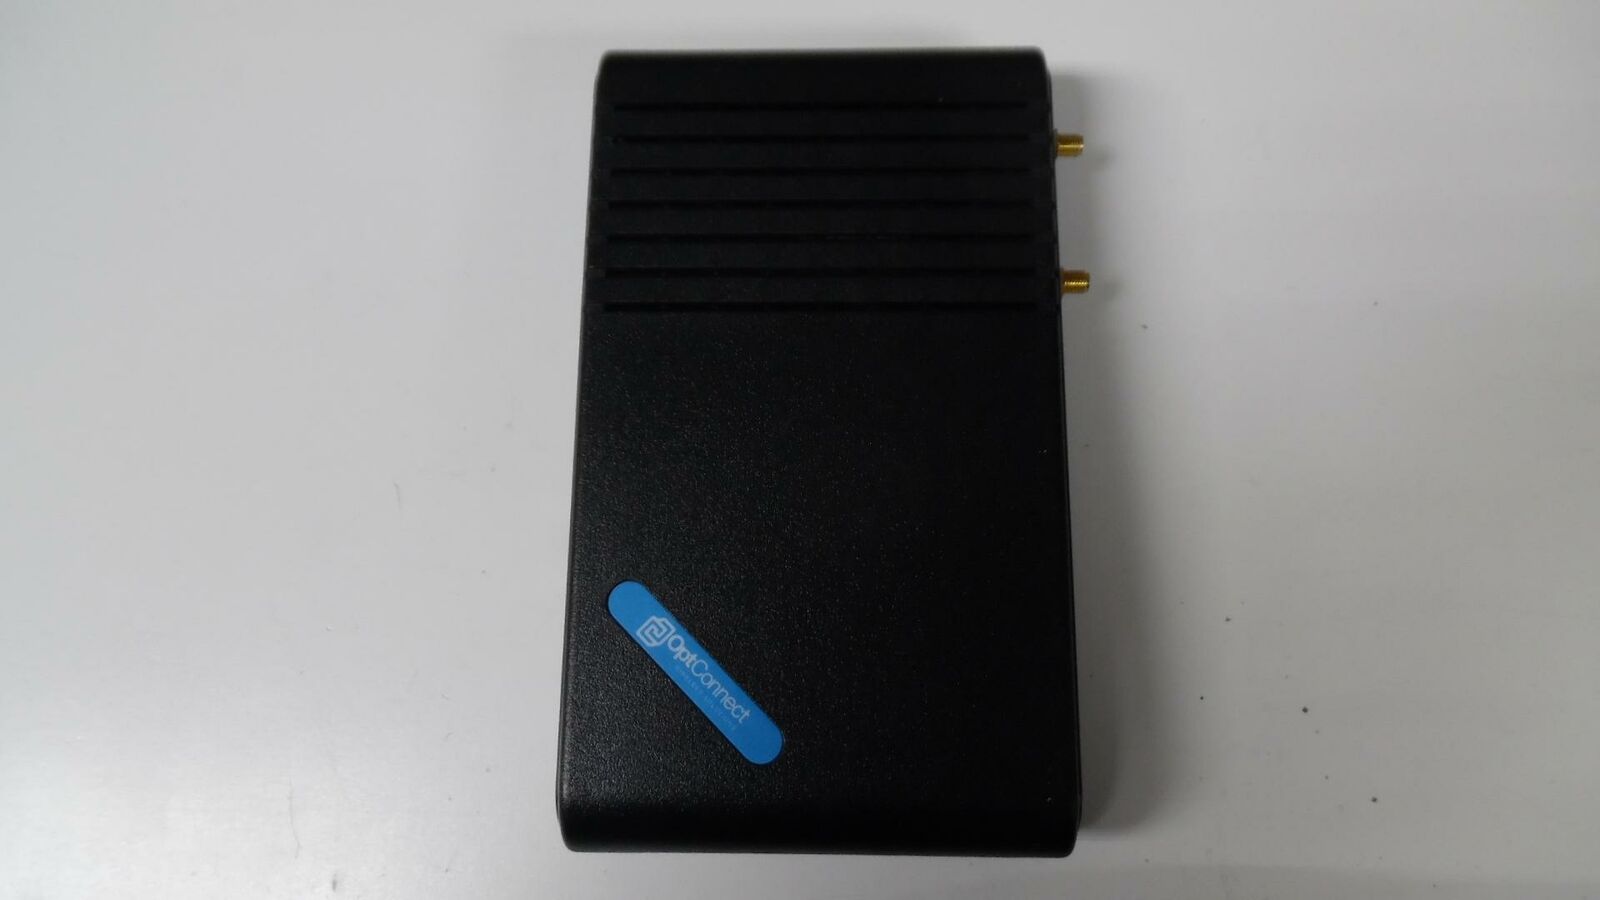 Original OptConnect OC-3250-RoHS 3G Wireless Modem for ATM - Tested